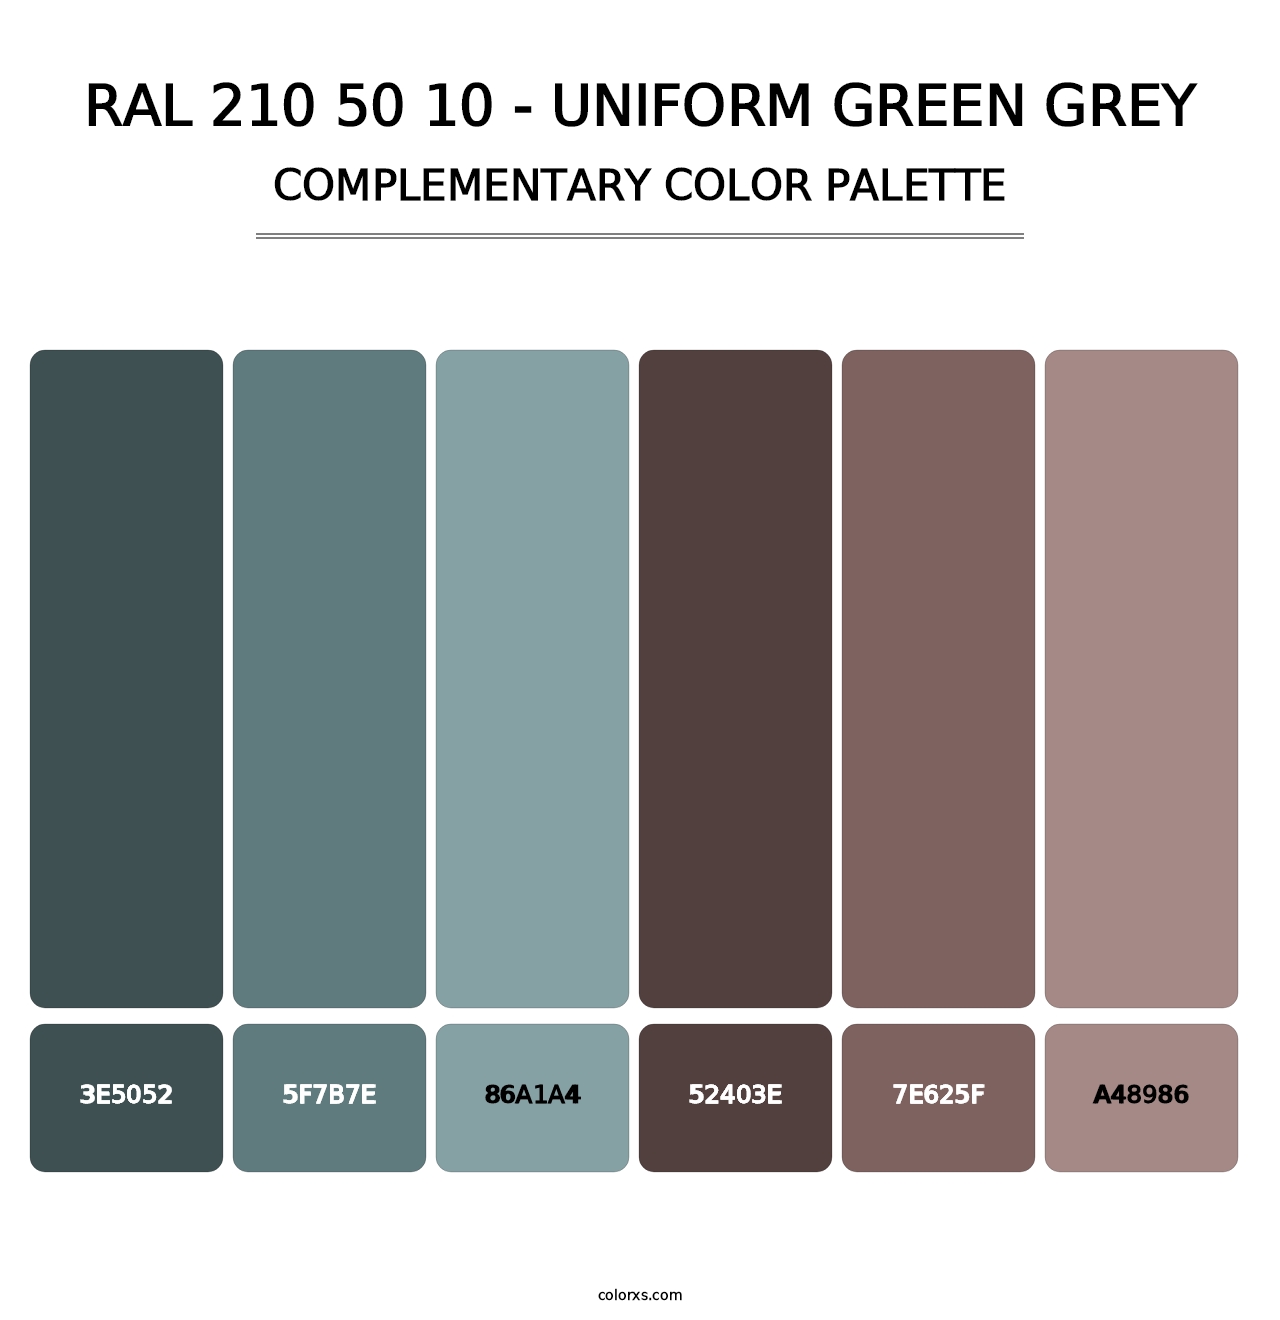 RAL 210 50 10 - Uniform Green Grey - Complementary Color Palette